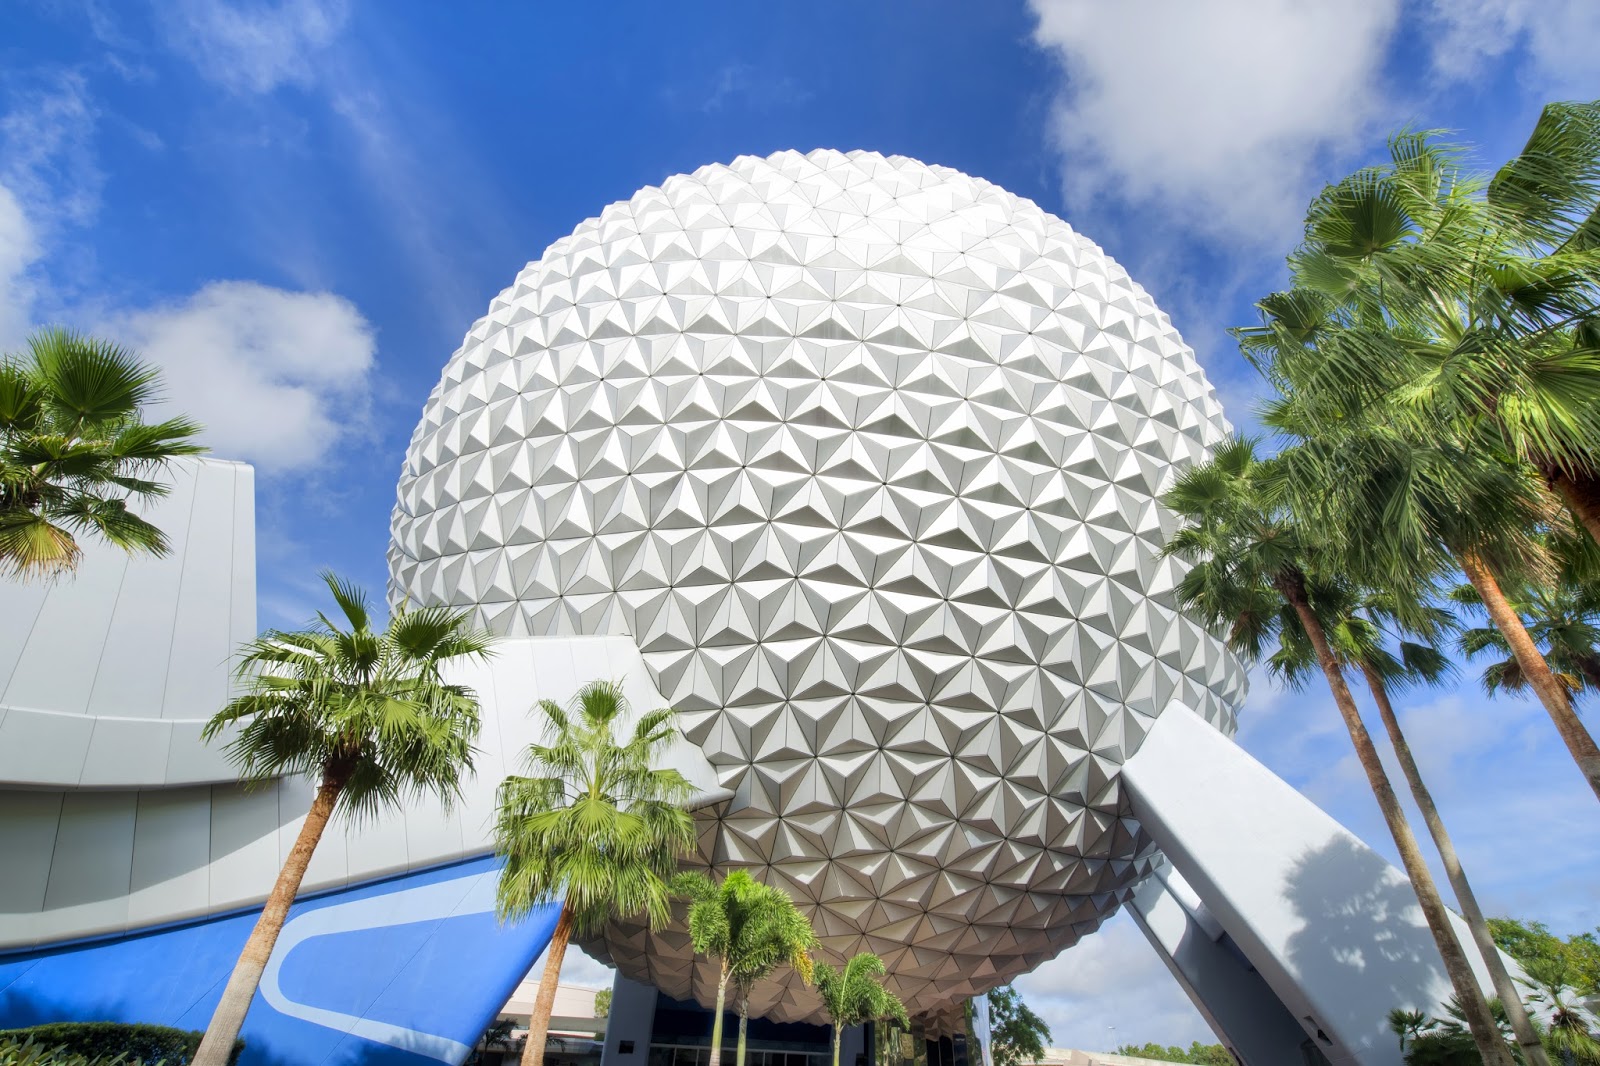 It's A Disney World After All: Attractions You Are Missing at Epcot